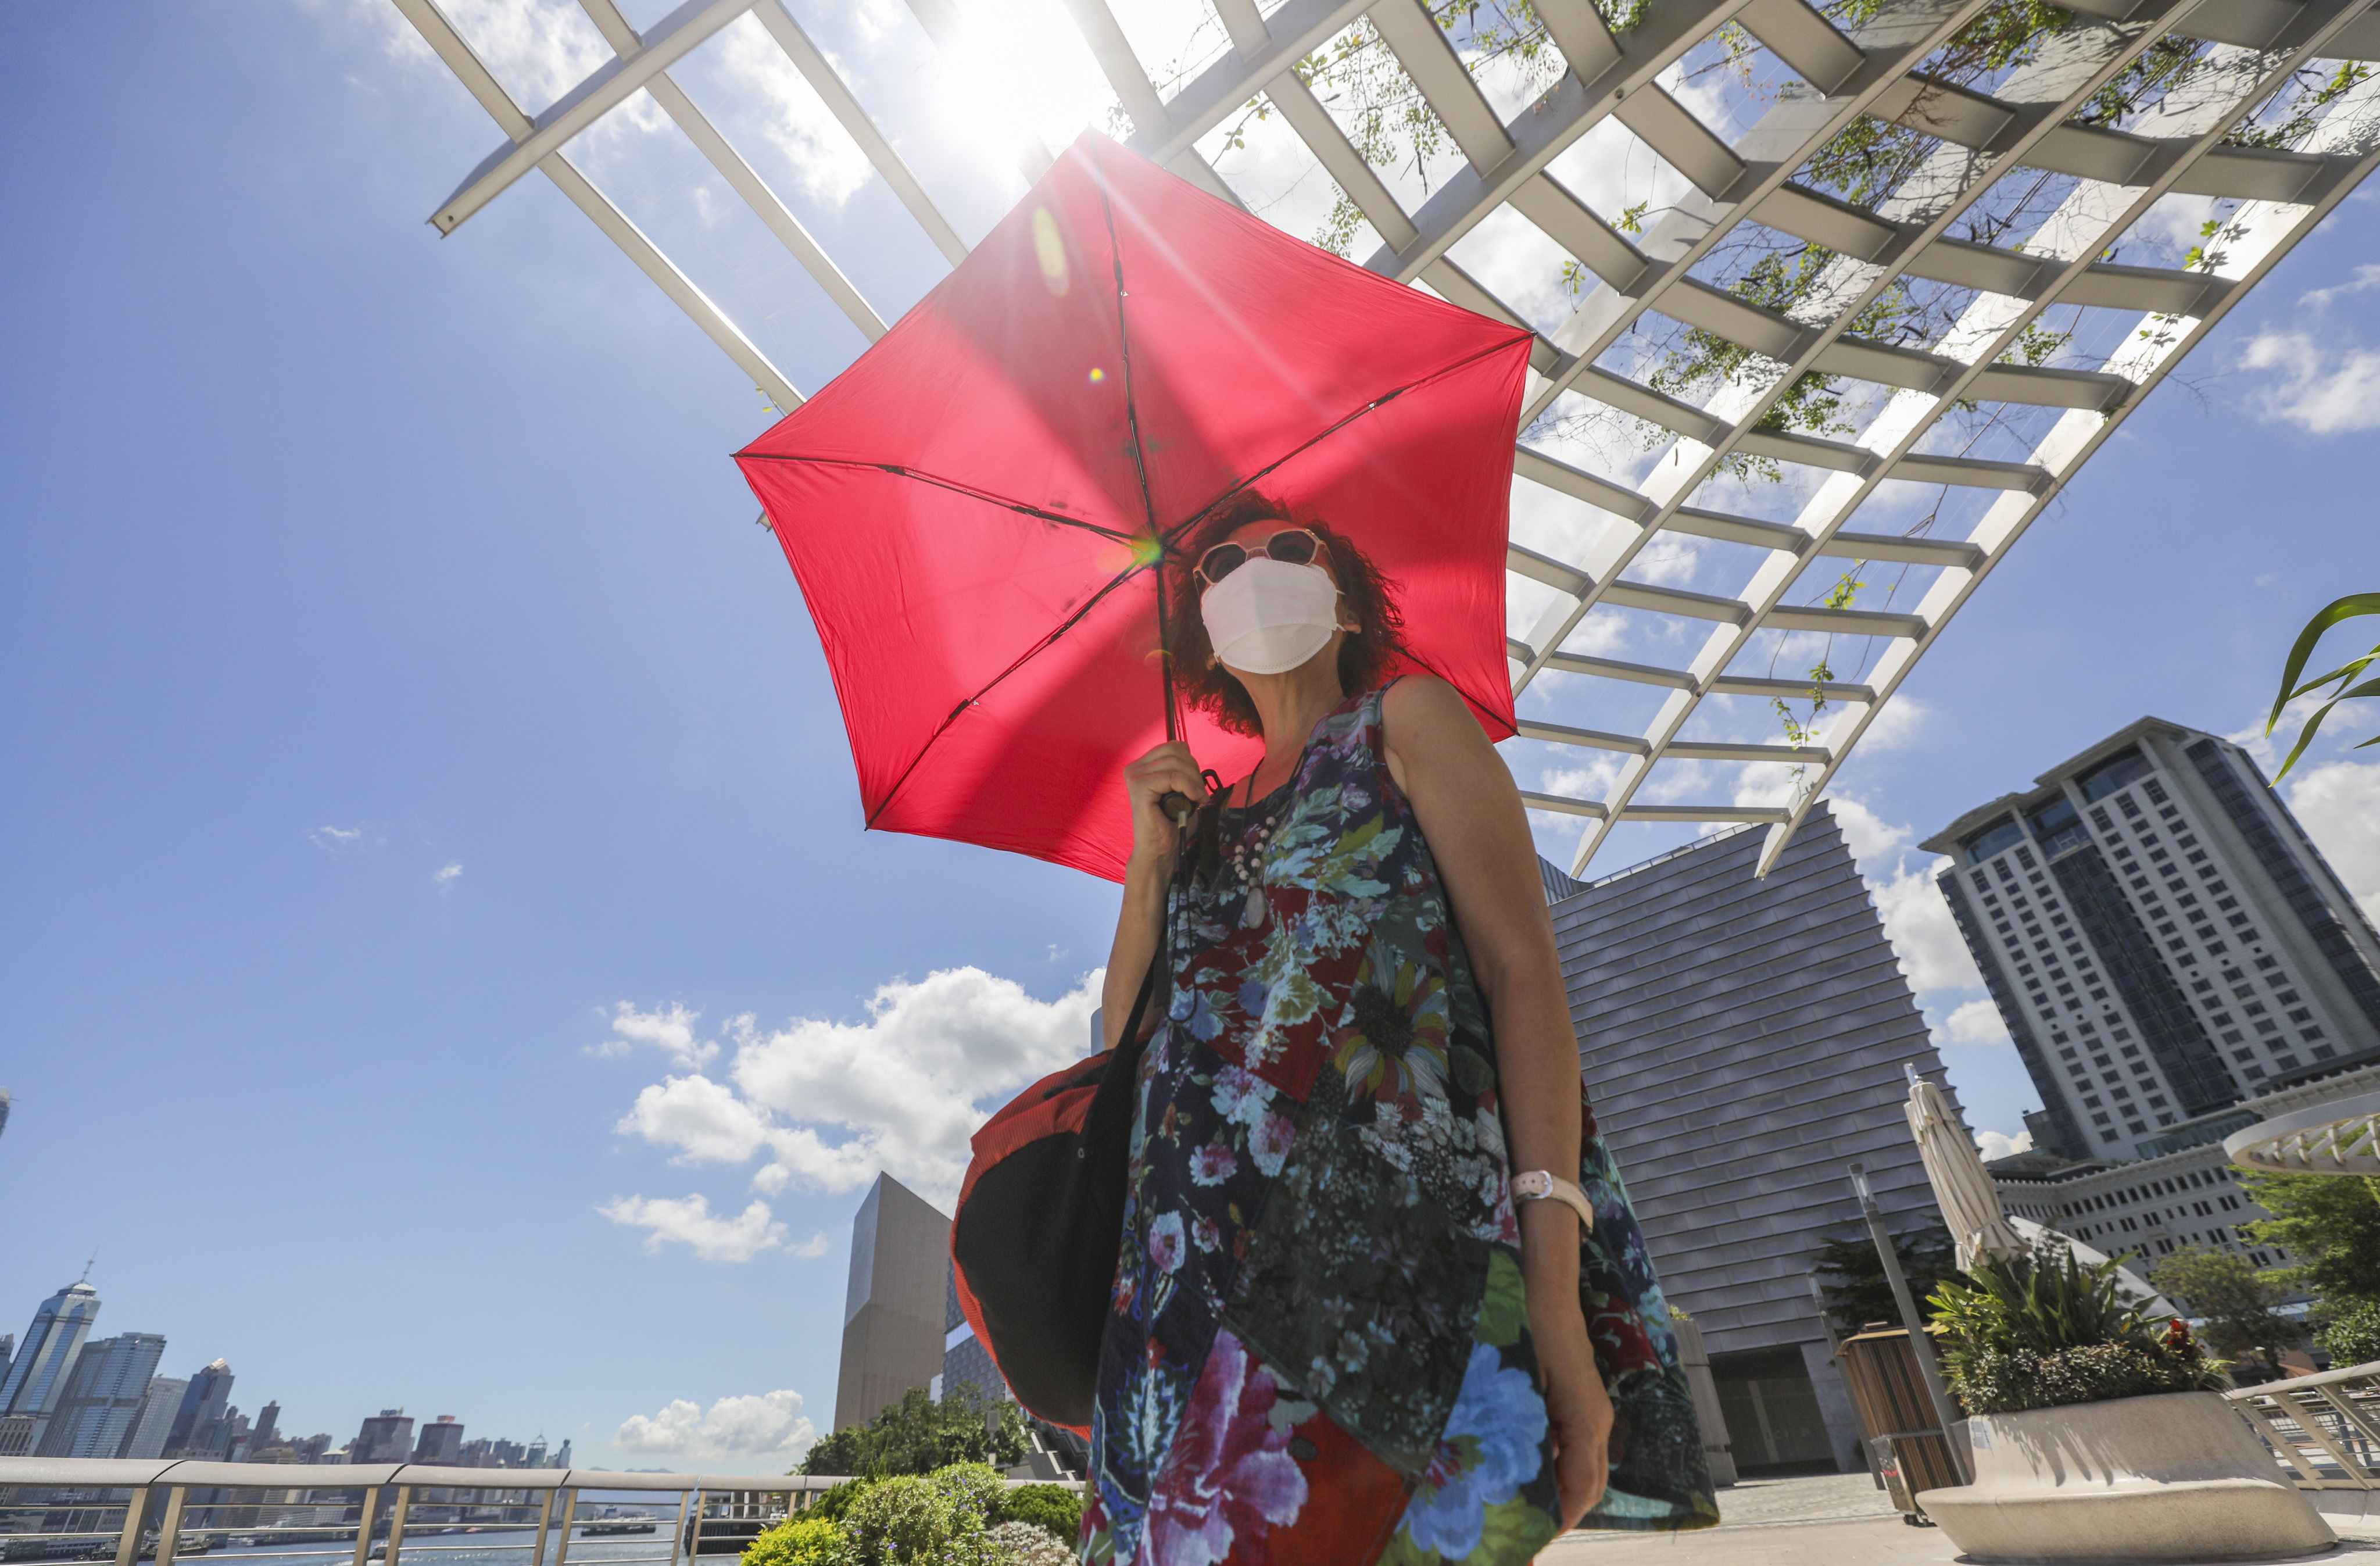 A woman shelters from the sun in Tsim Sha Tsui on July 12, after a very hot weather warning was issued by the Hong Kong Observatory. Photo: Xiaomei Chen